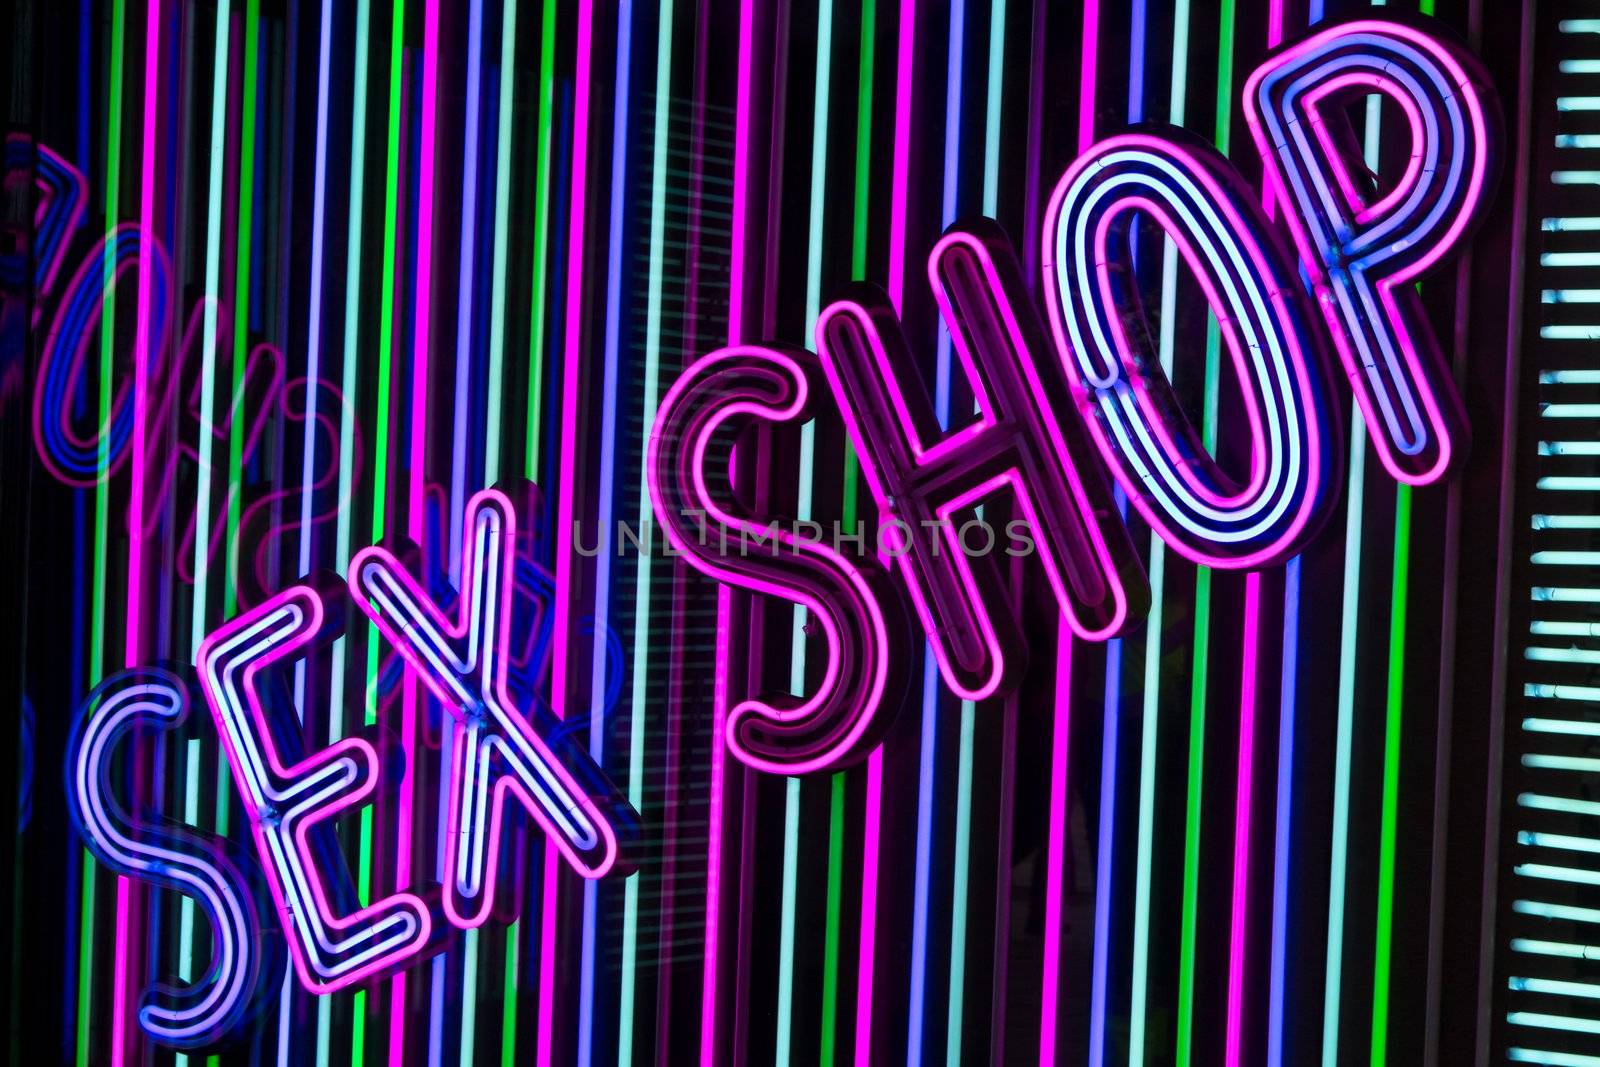 A neon sex shop sign in Madrid